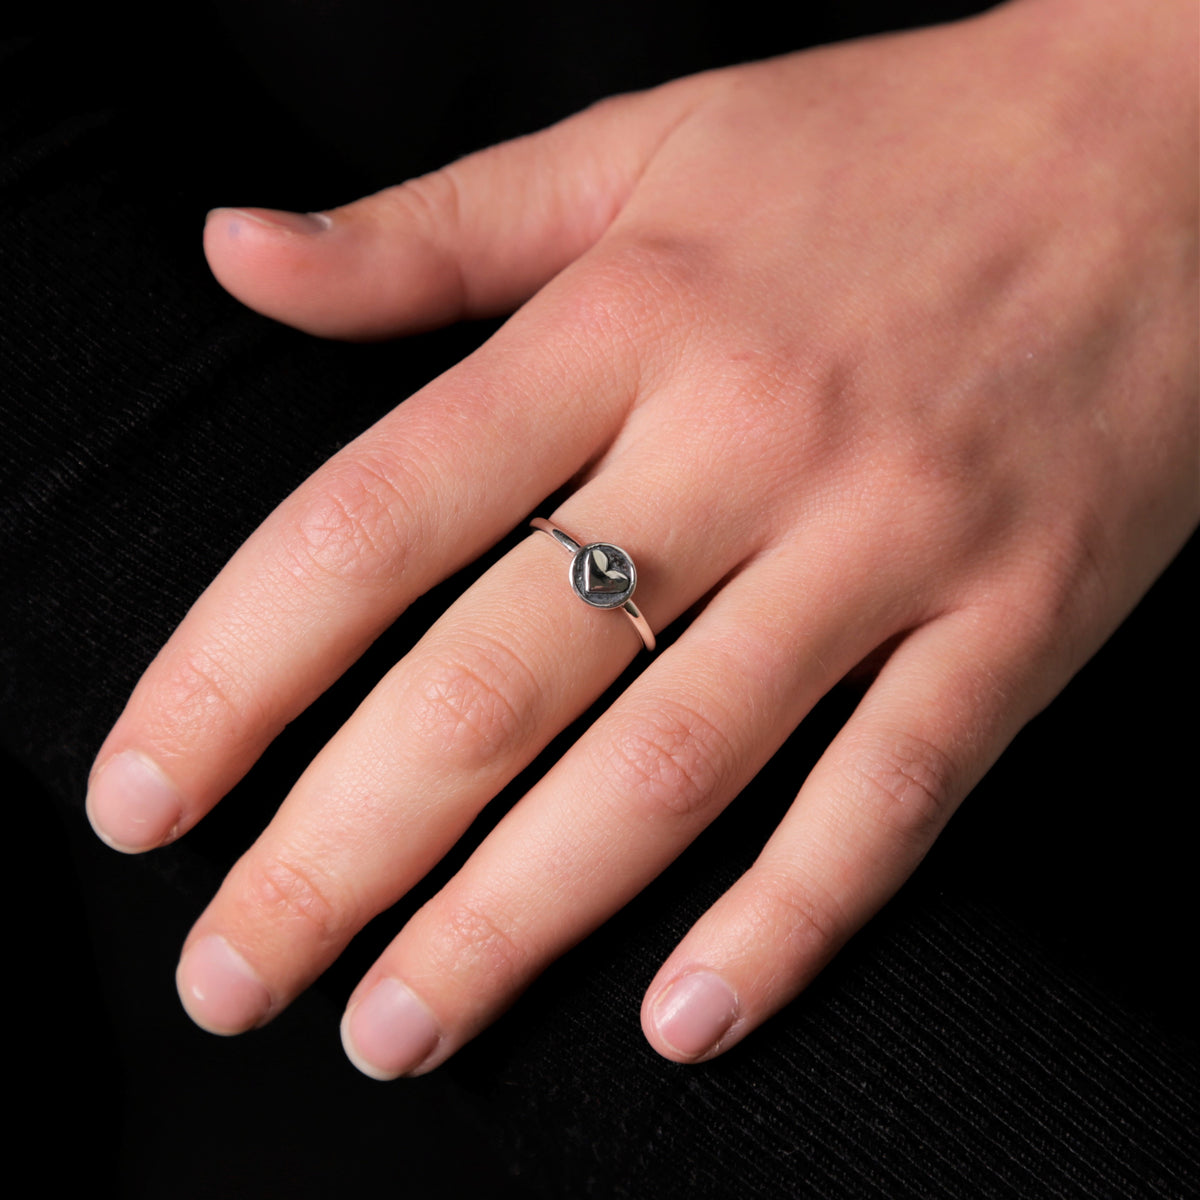 Silver Heart Imprint Ring - Stacker Ring